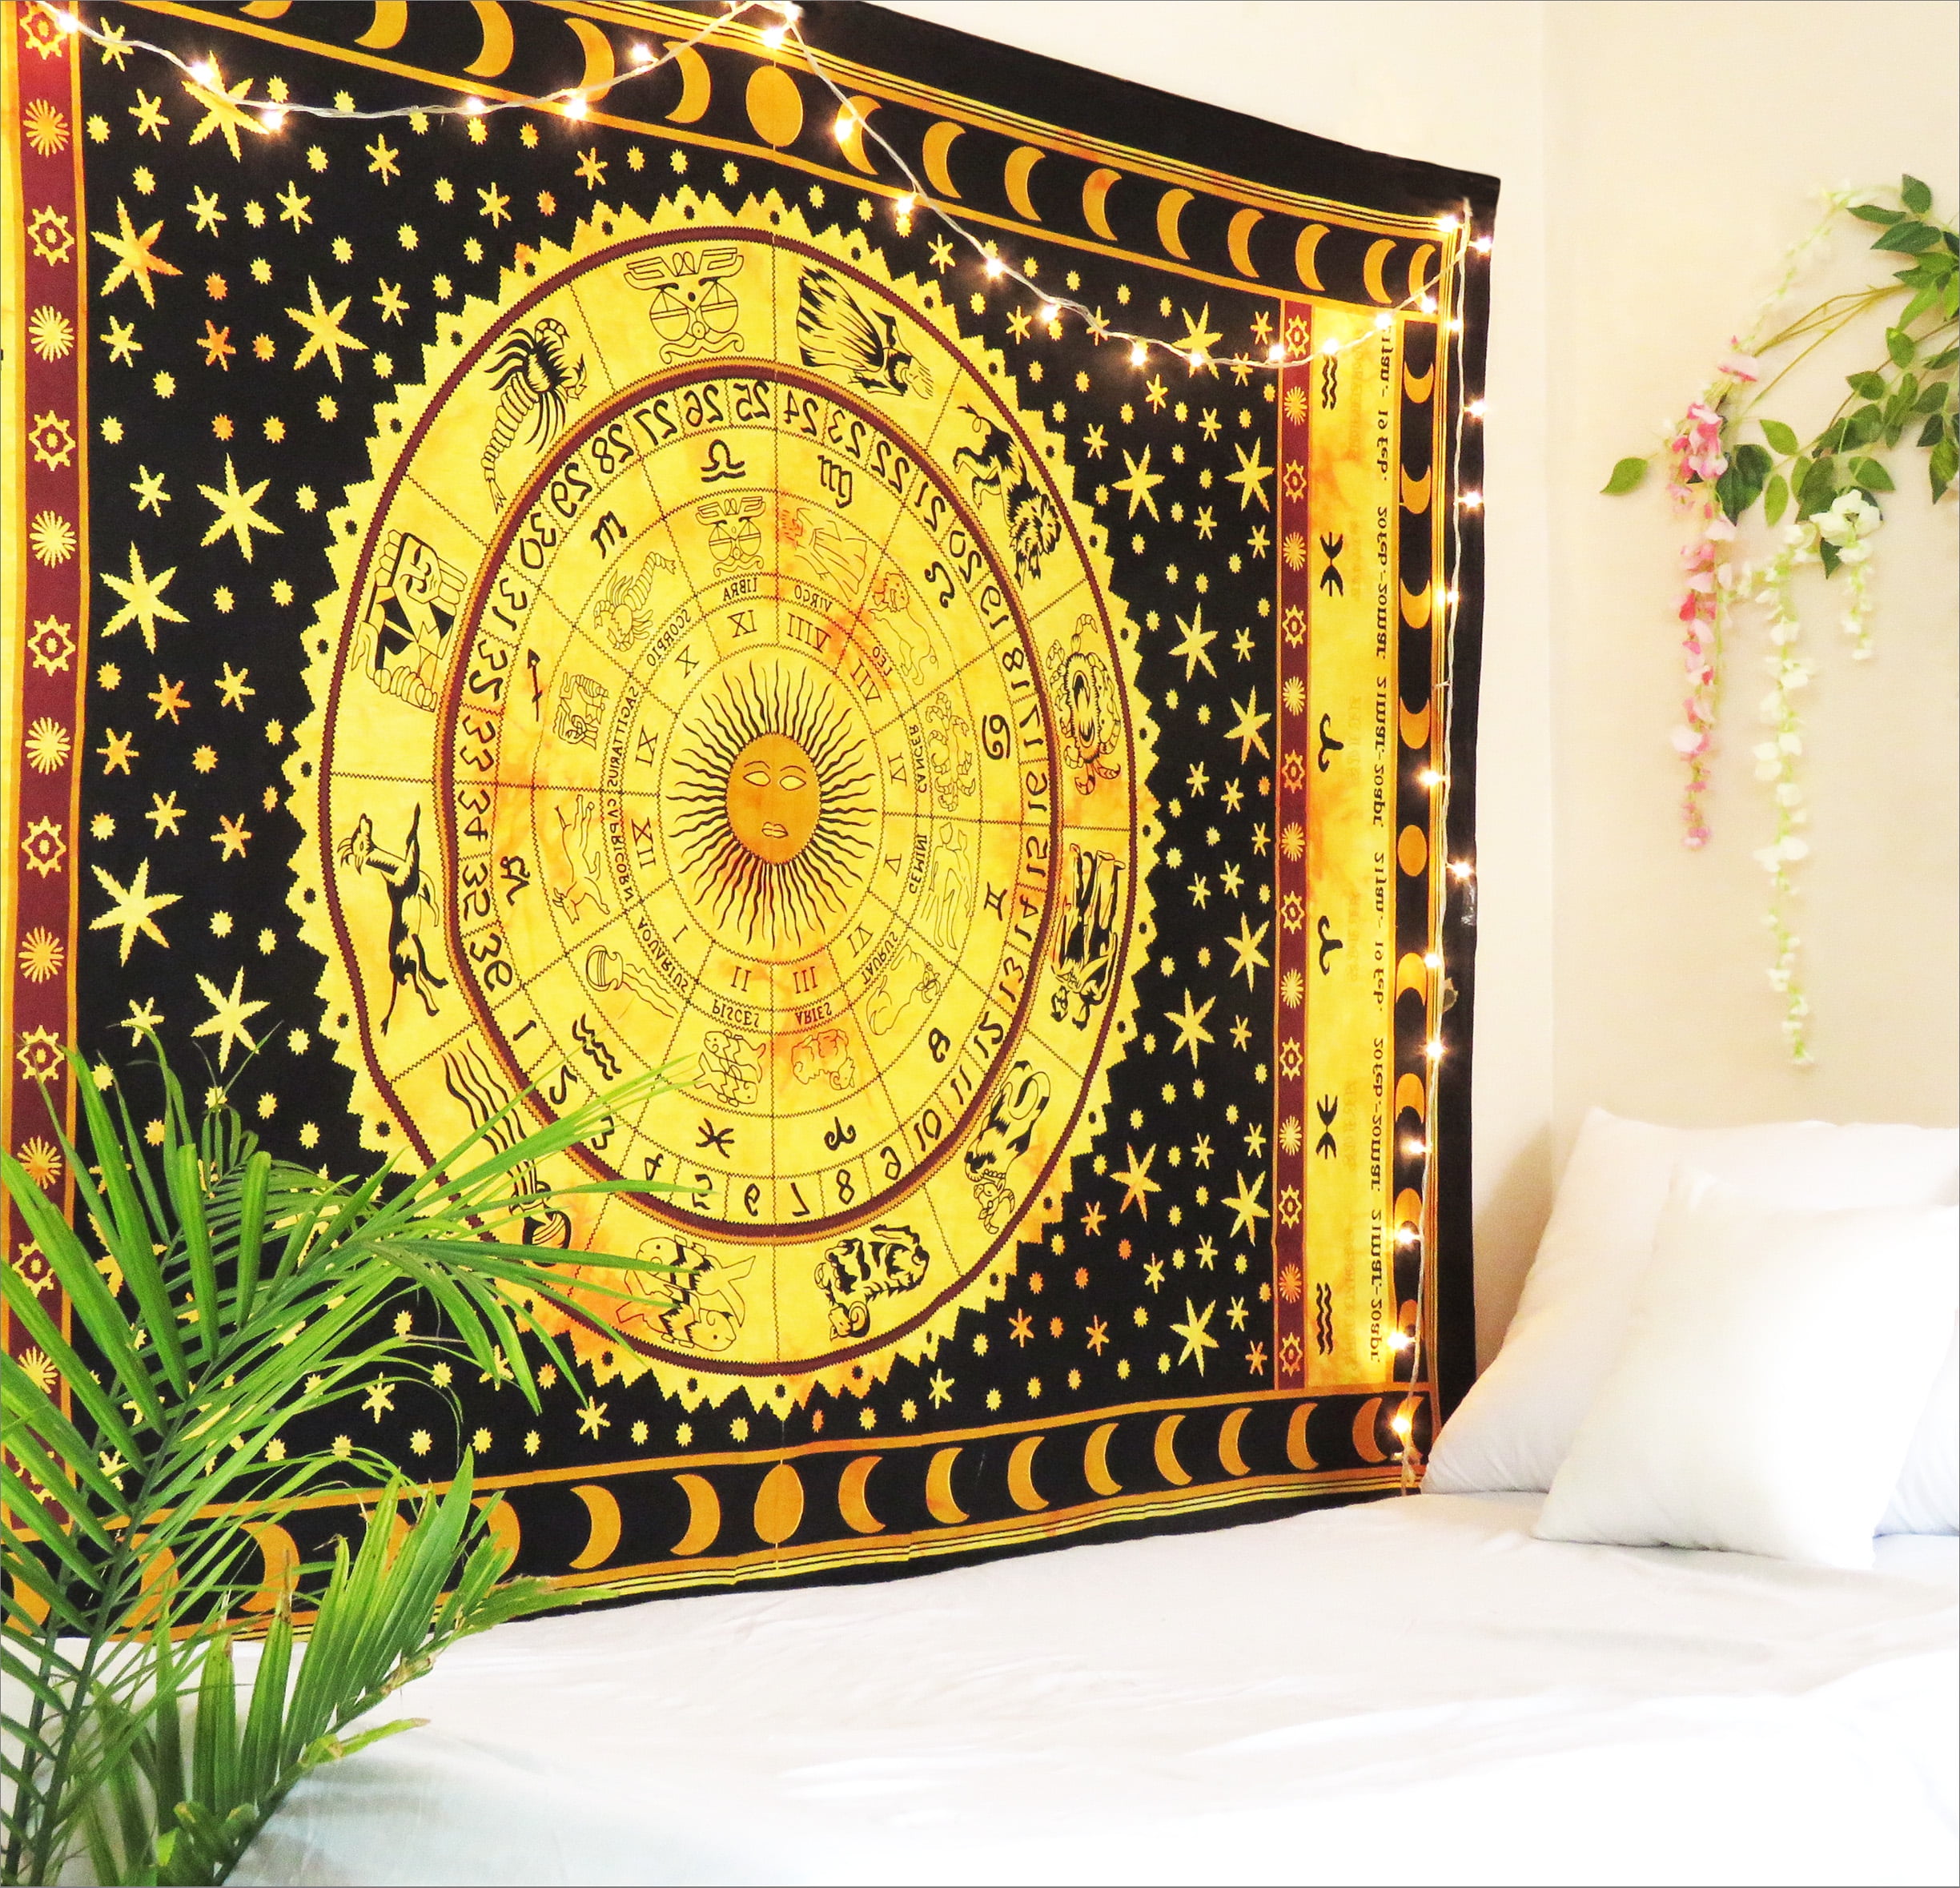 80 x 60in Neasyth Wall Hanging Tarot Tapestry Meditation Divination Ethnic Tapestries Art Rugs Polyester for Home Decor The Star